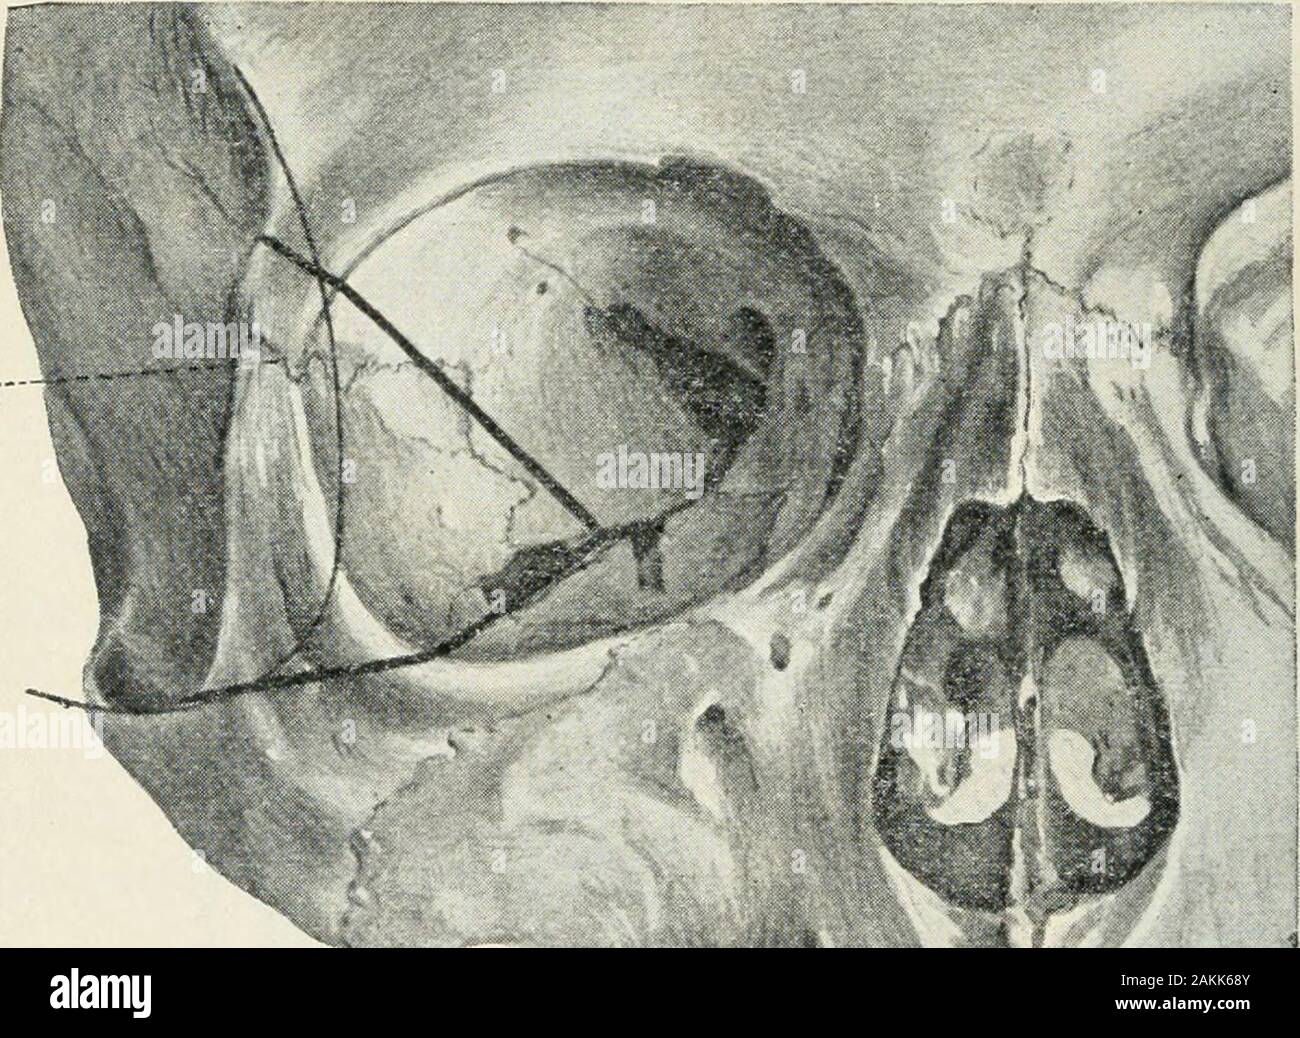 Atlas and epitome of operative ophthalmology . 285 286 OPERATIONS ON THE EYE. Plate io. Opening of the orbit after Krönlein. The skin-muscle-bone flap hasbeen reflected forward and shows a large portion of the periorbita. Thelatter is then incised from behind forward, producing the picture shownon the next Plate. as for Fig. 117), are illustrated in Figs. 106-116. Axen-feld lias devised for this operation special blunt hooks andholders or retractors, in the form of round plates attachedto an angulated handle, for holding the orbital tissuesapart. (This may be obtained from Windier, in Berlin.) Stock Photo